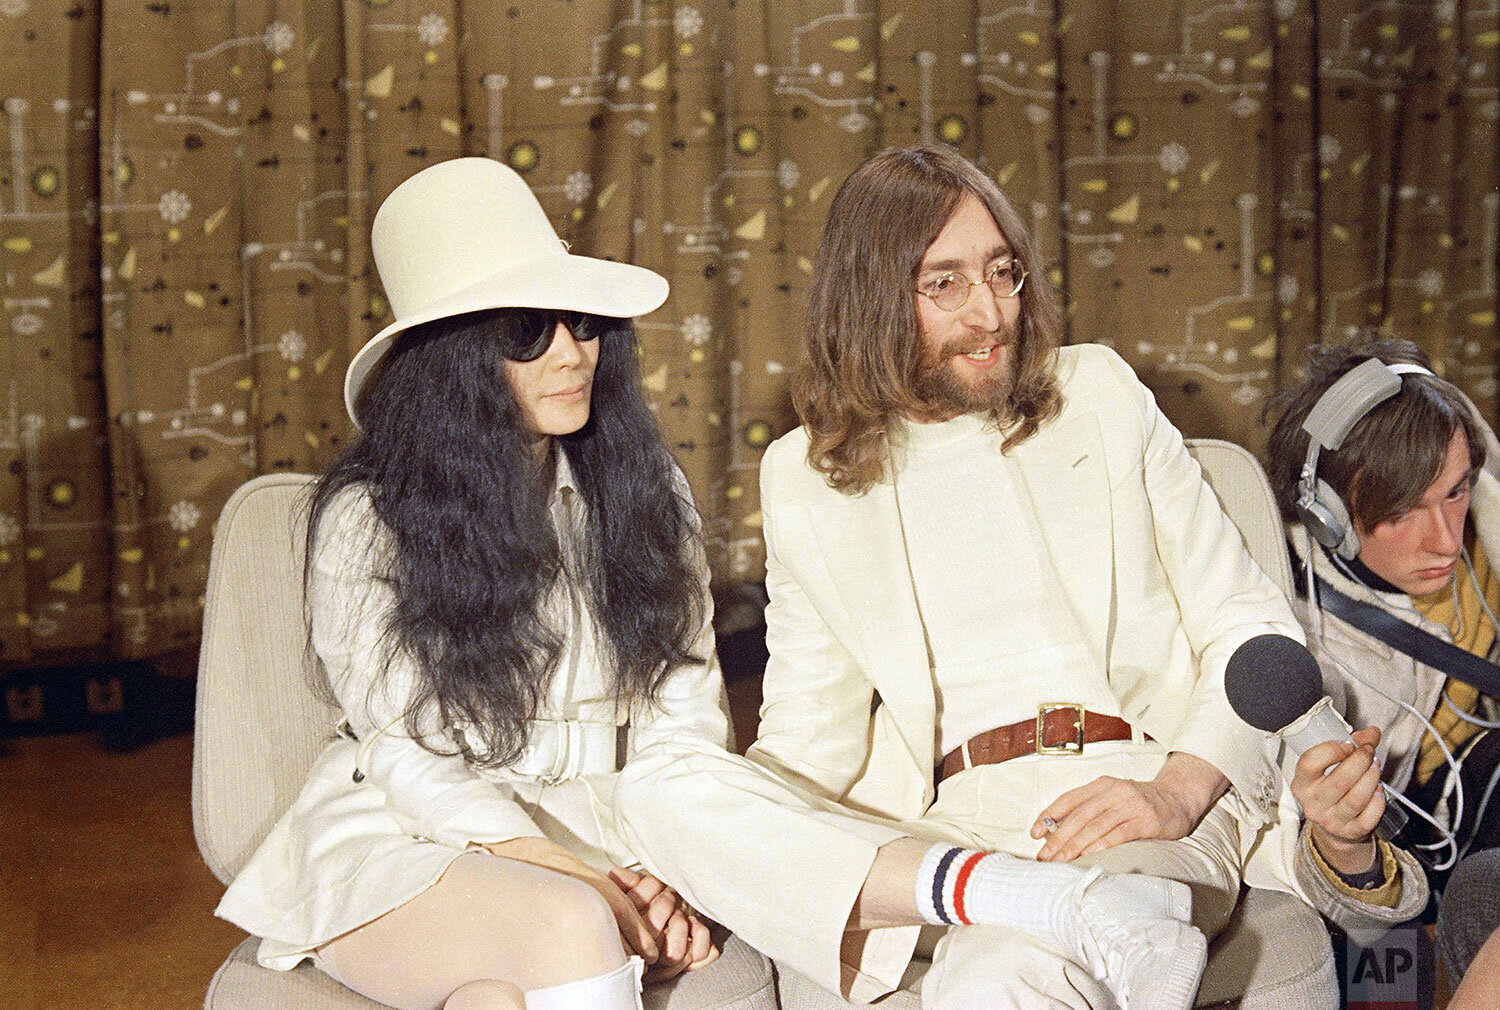  John Lennon, right, is seen with his wife Yoko Ono at a press conference in 1969. (AP Photo) 